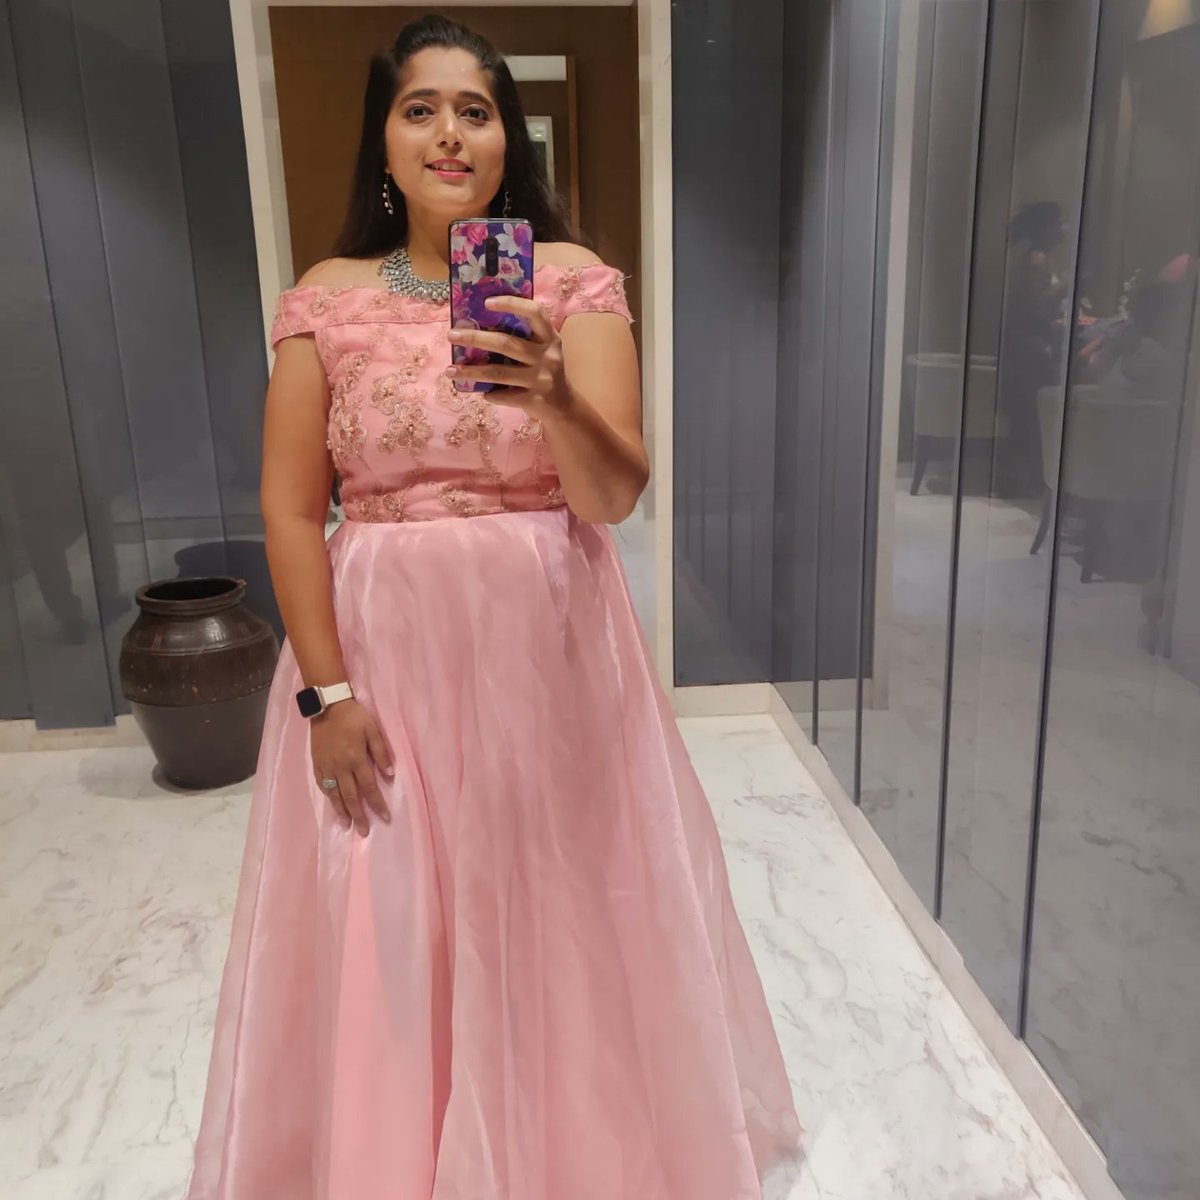 anchorhoneymodi.com
Hosted wedding reception for Patel Family ❤

Great event, so amazing crowd it was..Always Grateful 🥰❤

Wardrobe by Jtaraa by jimmi 

#anchoringdiaries #anchoringthelight #weddingplanners #weddinganchoring #wedding #wedding #sangeetoutfit #receptionlook